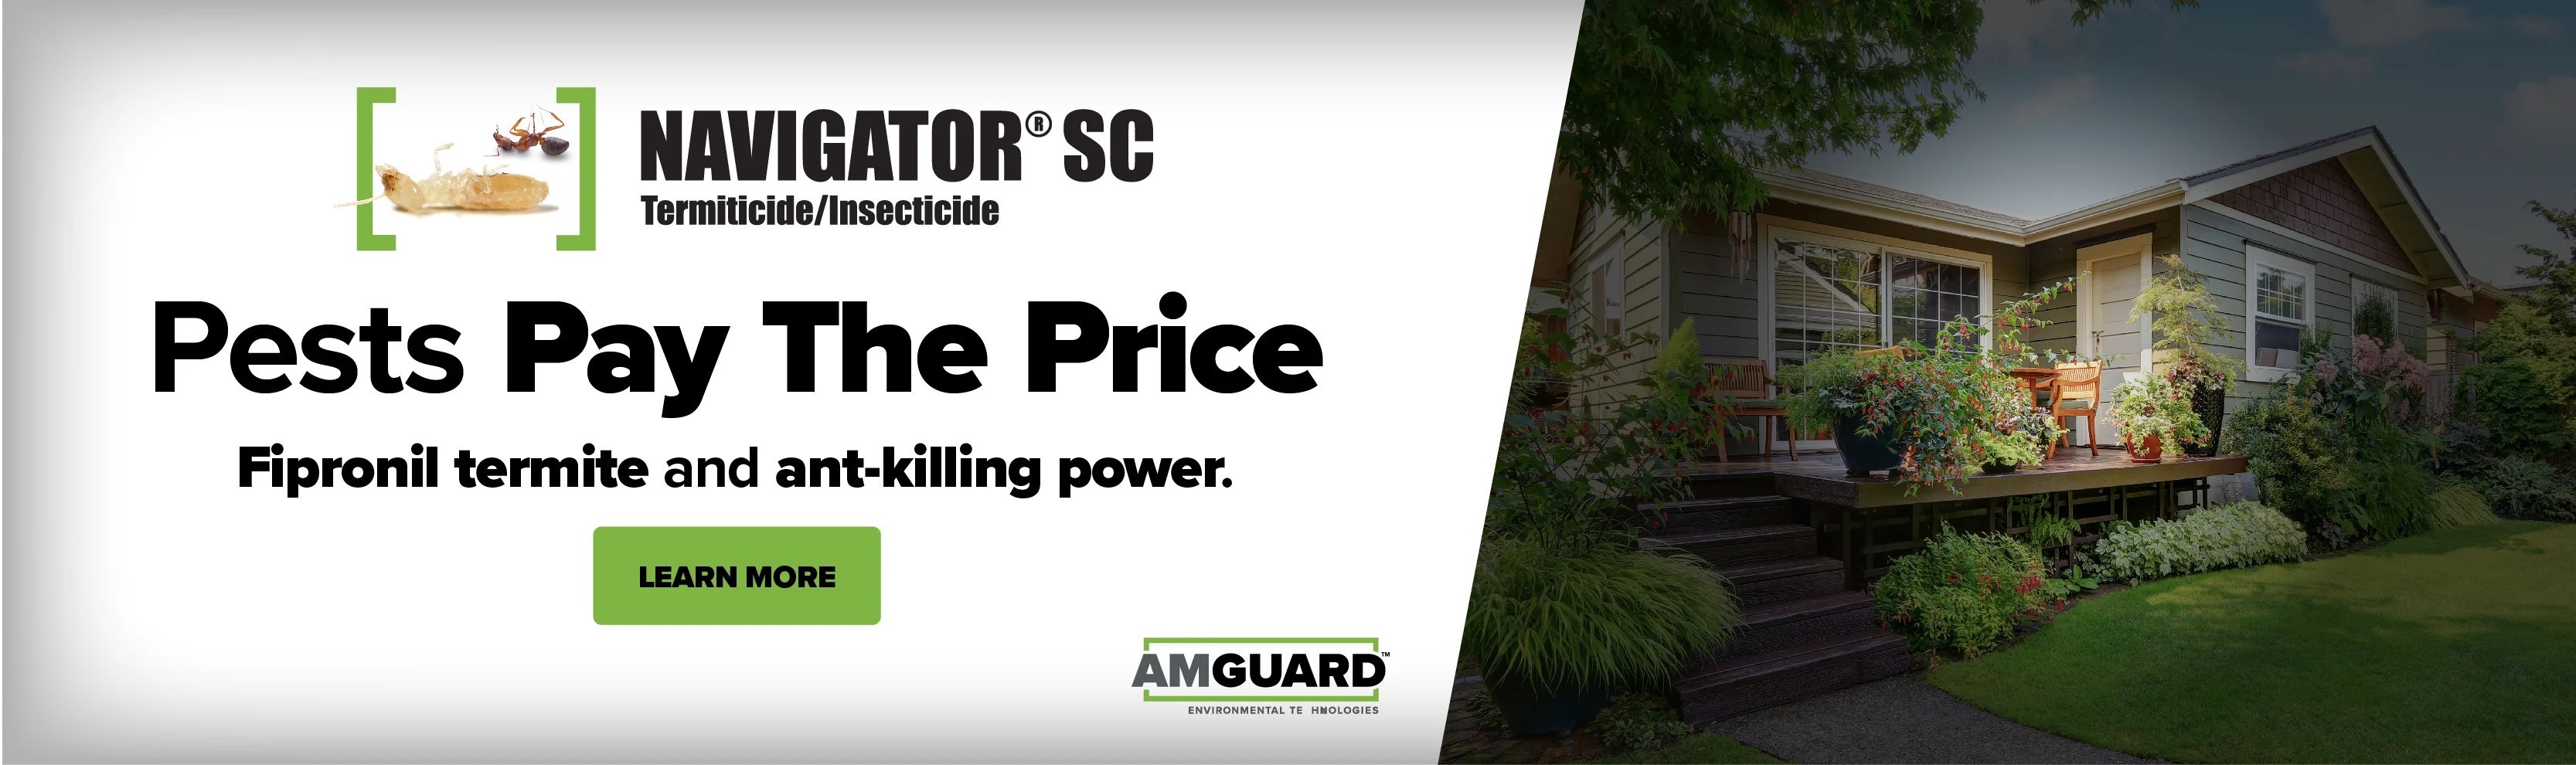 Pests Pay The Price. Shop Navigator SC Now!